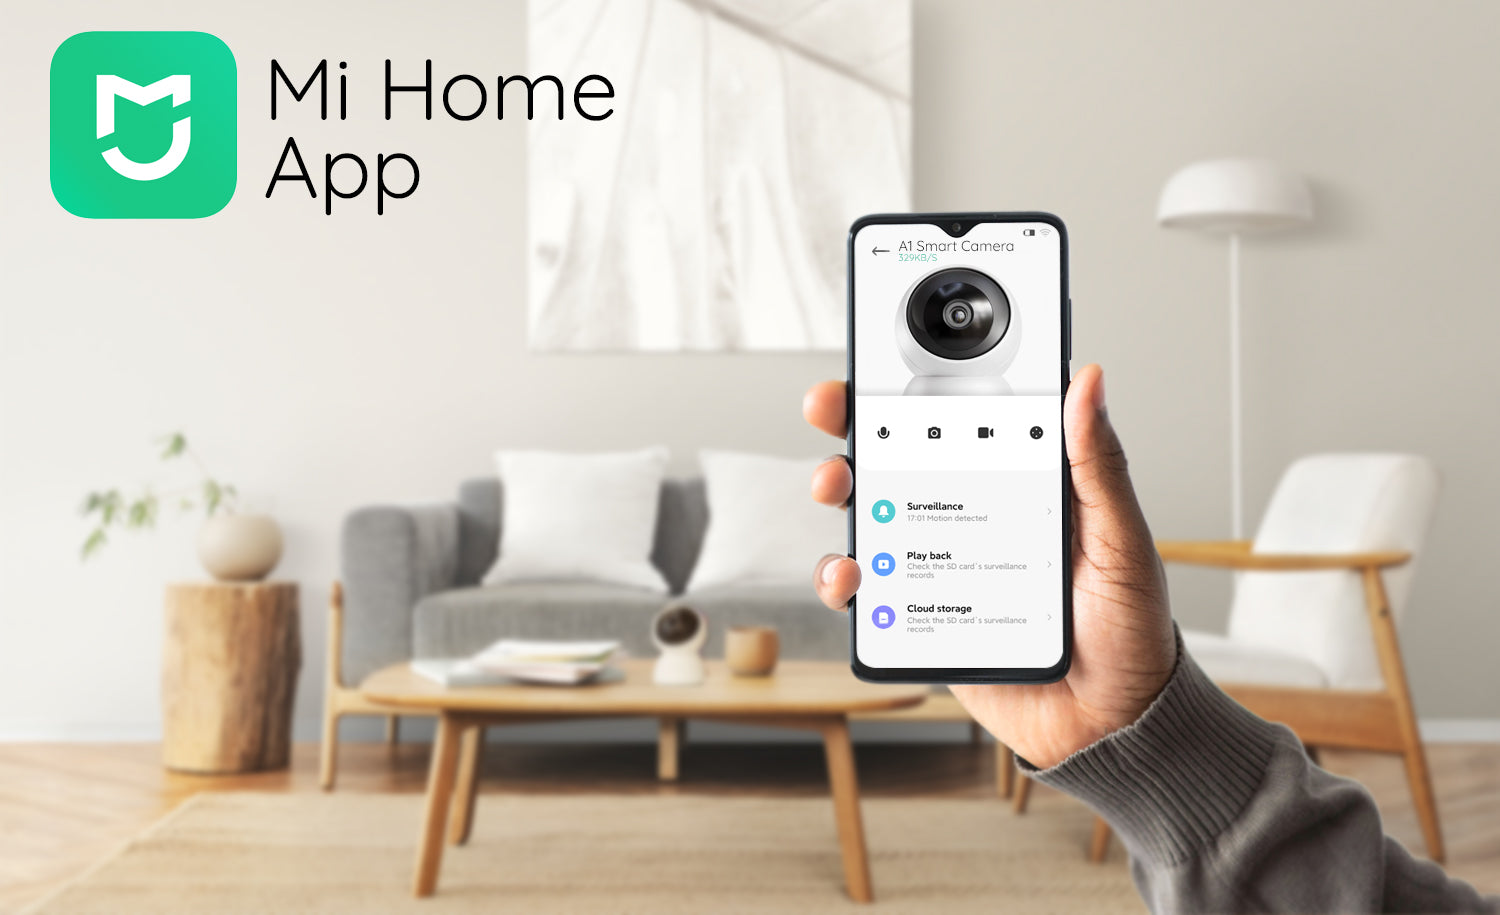 hand-holding-phone-with-mi-home-app-open-and-imilab-A1-camera-on-the-phones-screen-connected